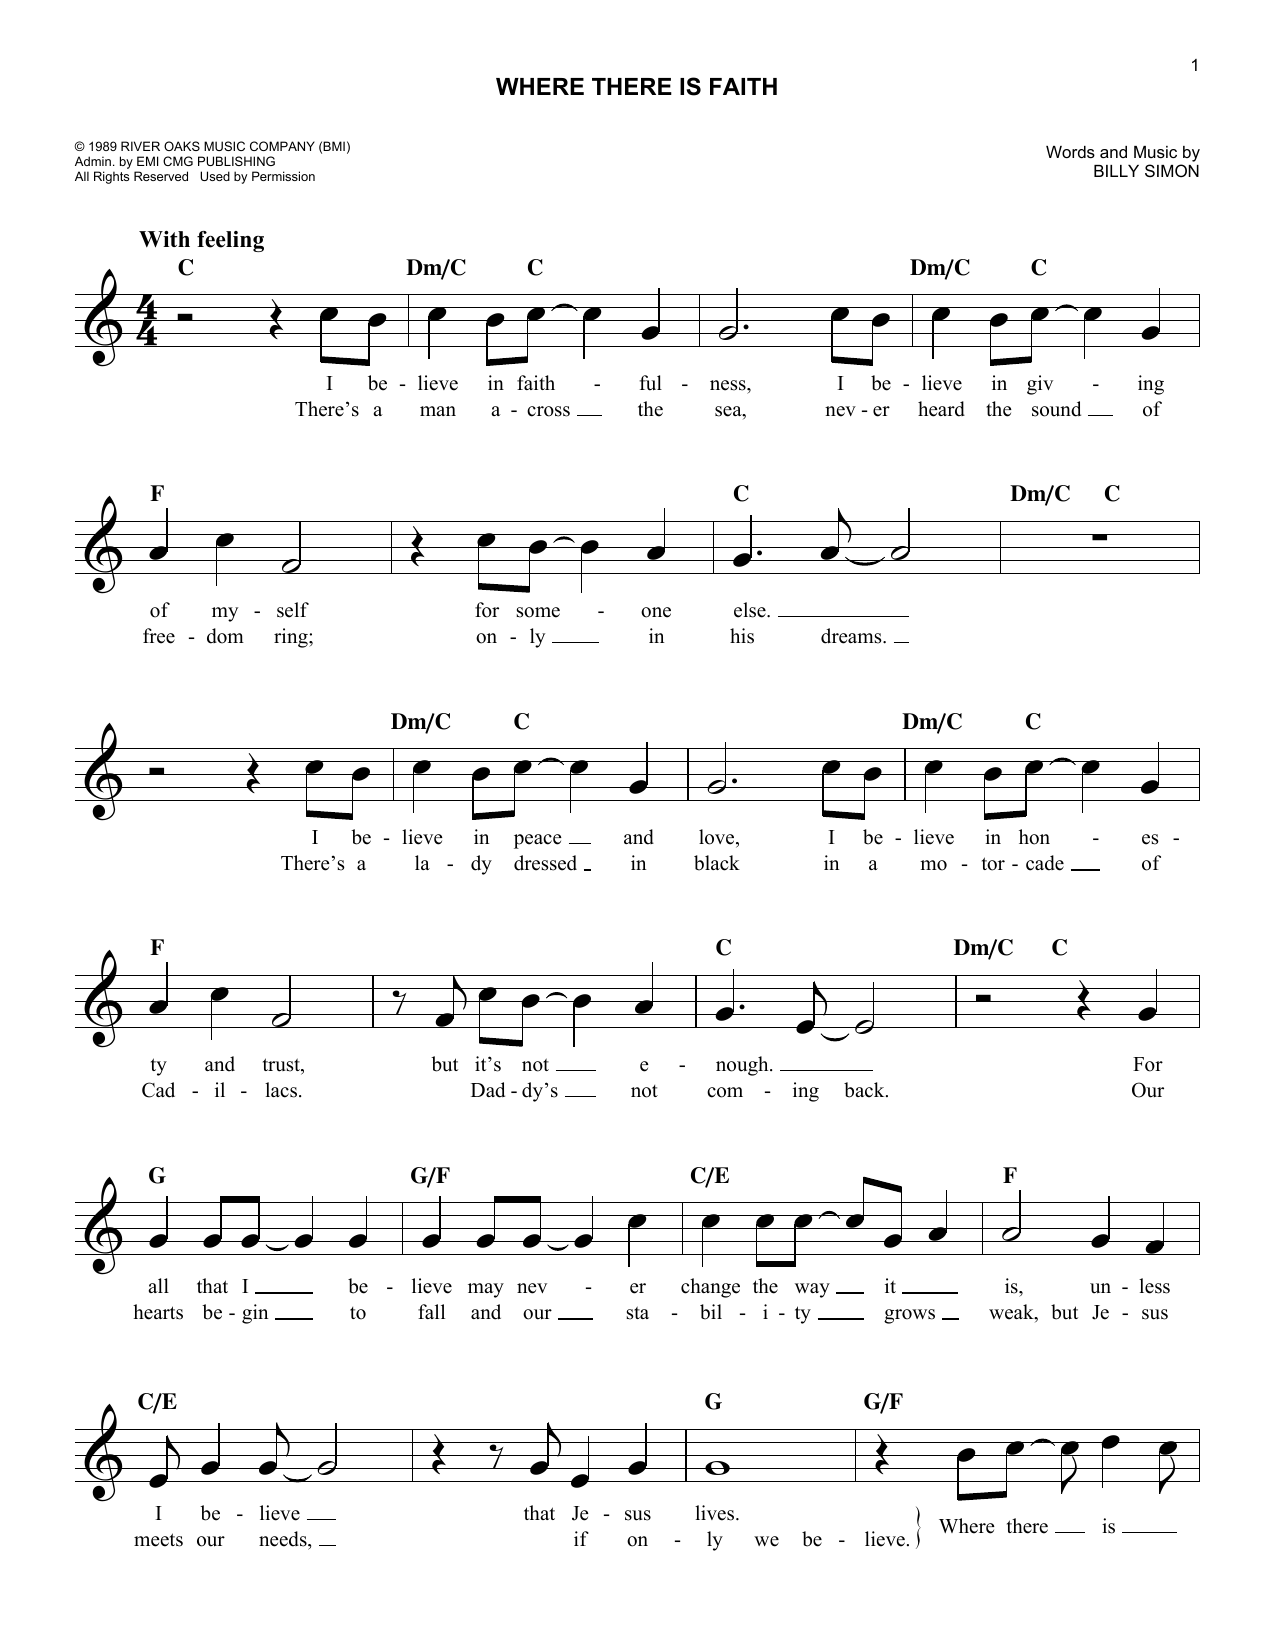 Download 4 Him Where There Is Faith Sheet Music